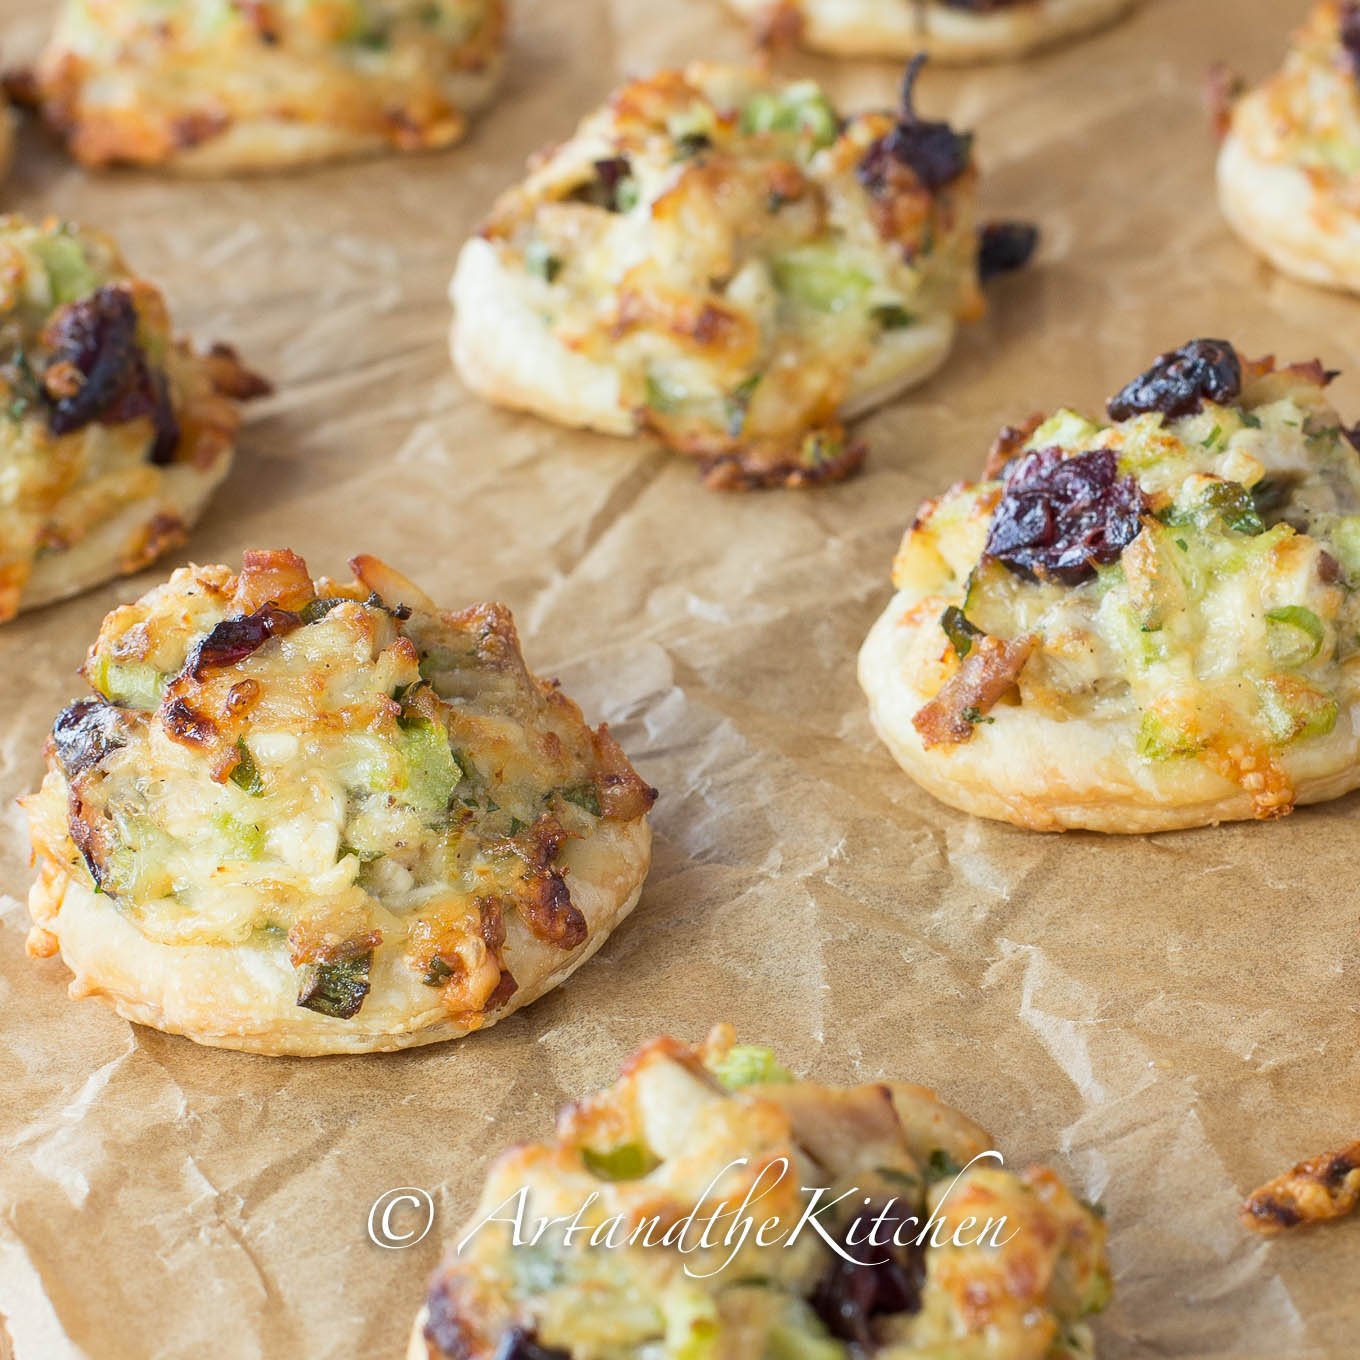 Bites of puffed pastry topped with turkey salad mix and cranberries.